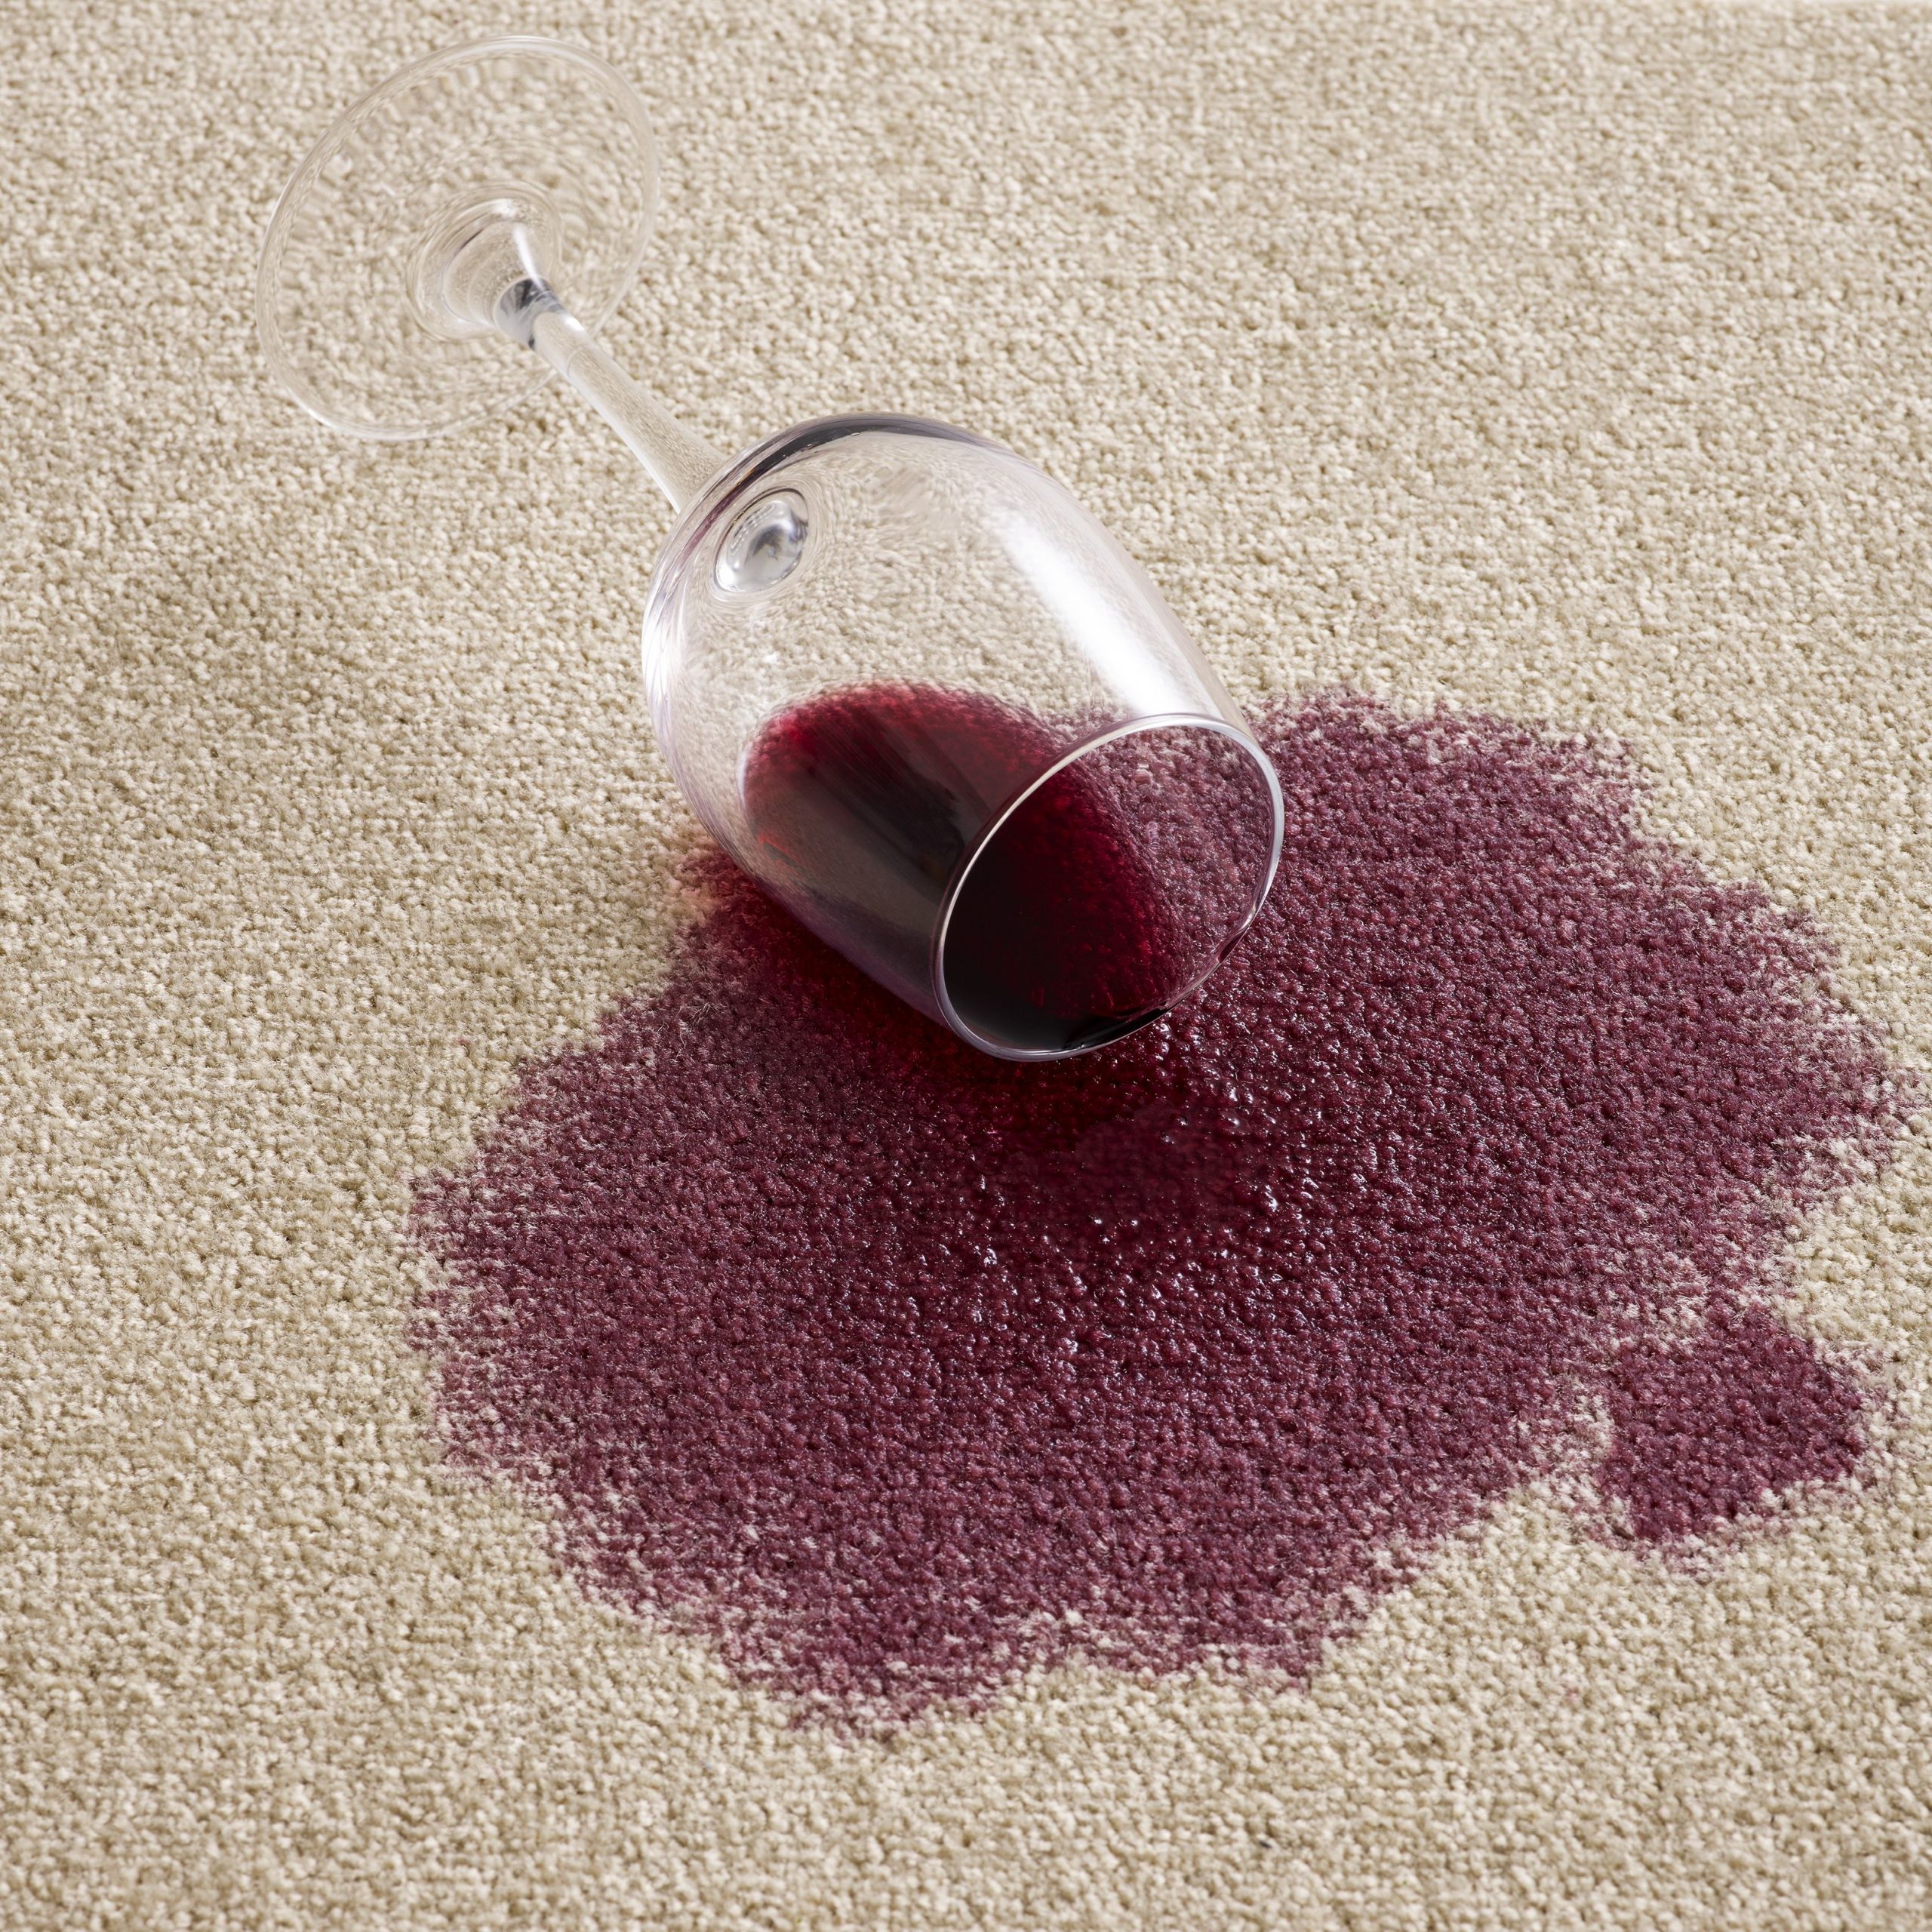 Red wine stains on furniture how to remove, IAMMRFOSTER.COM